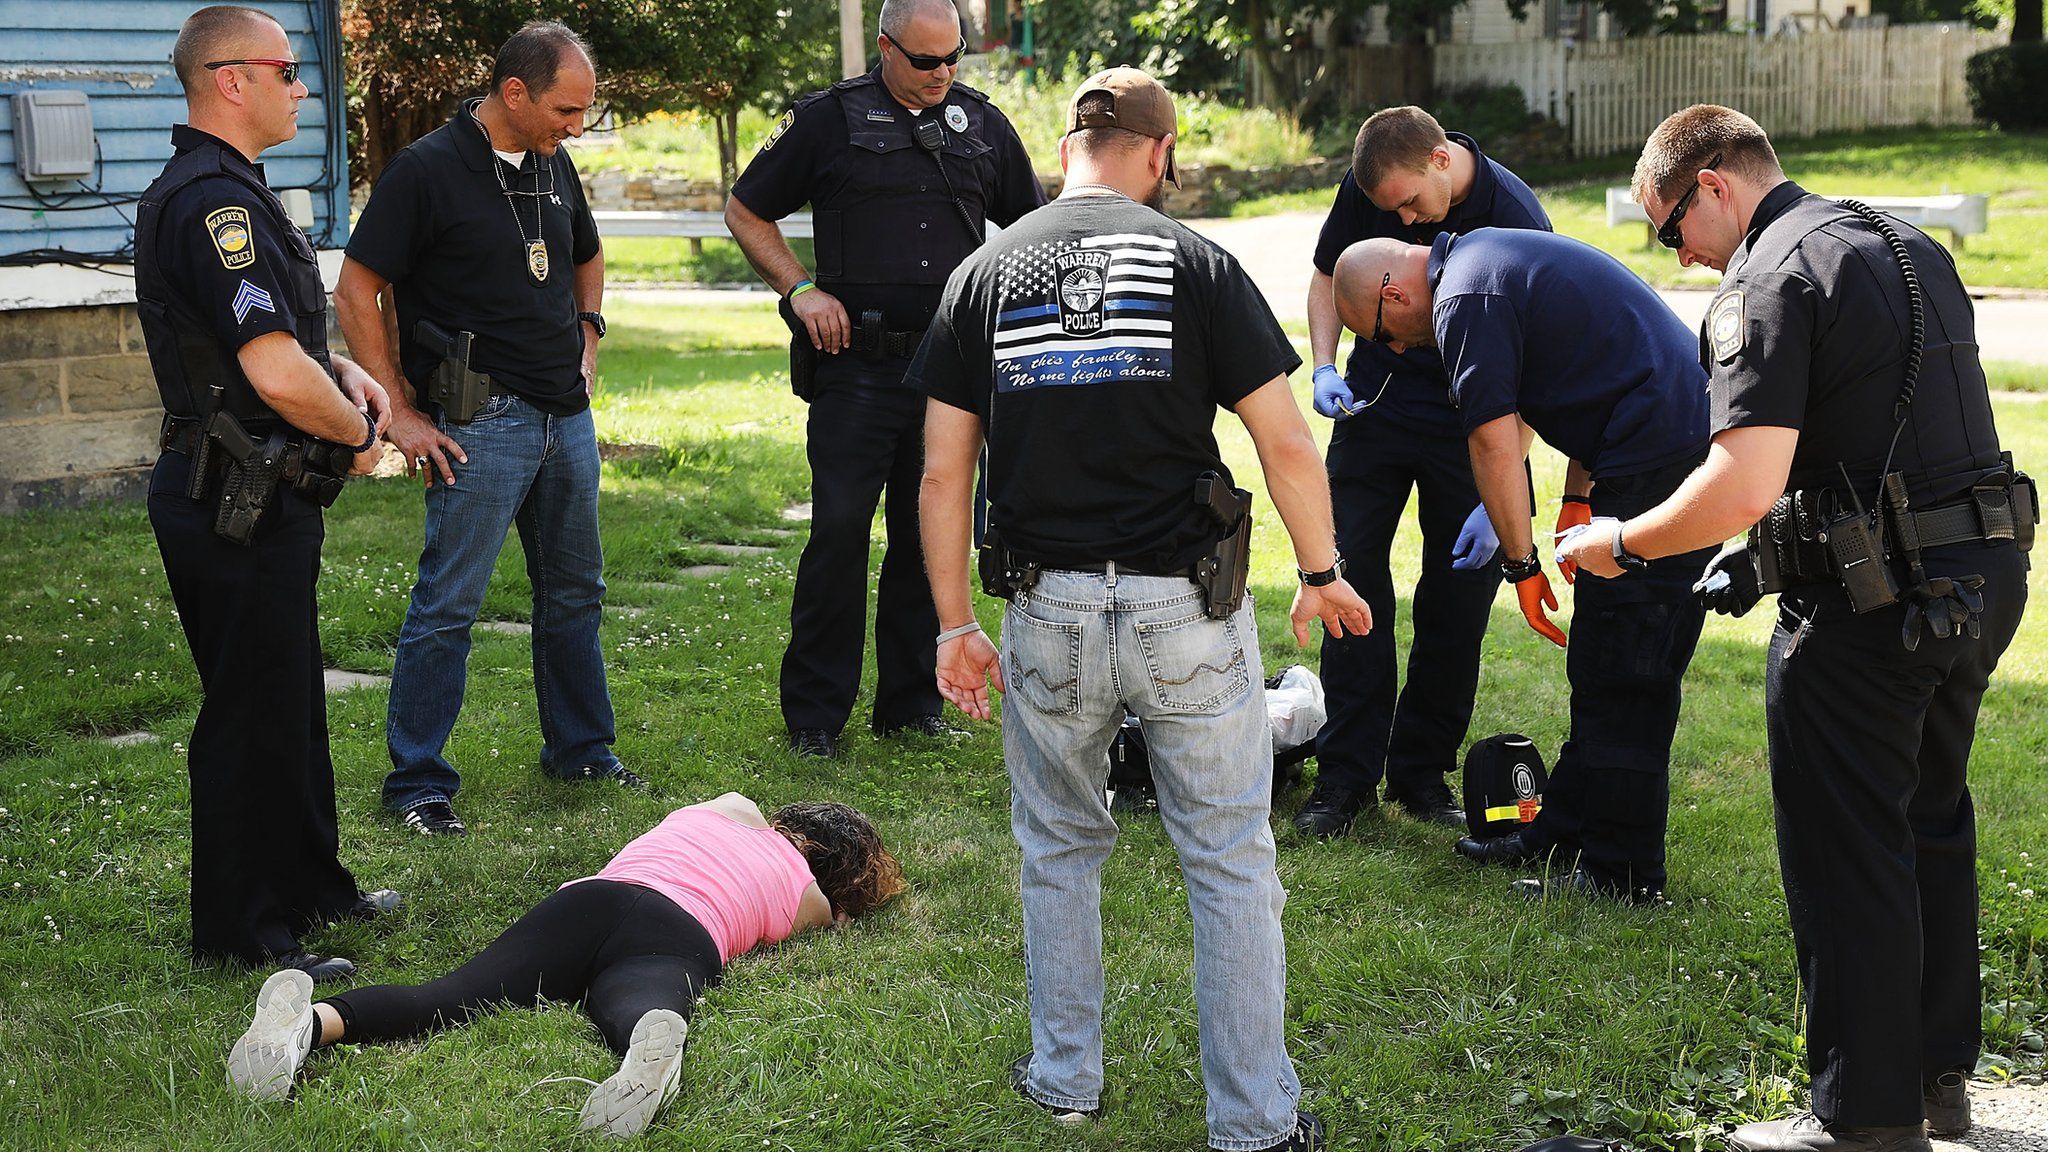 Medical workers and police treat a woman who has overdosed on heroin in Warren, Ohio, on 14 July 2017